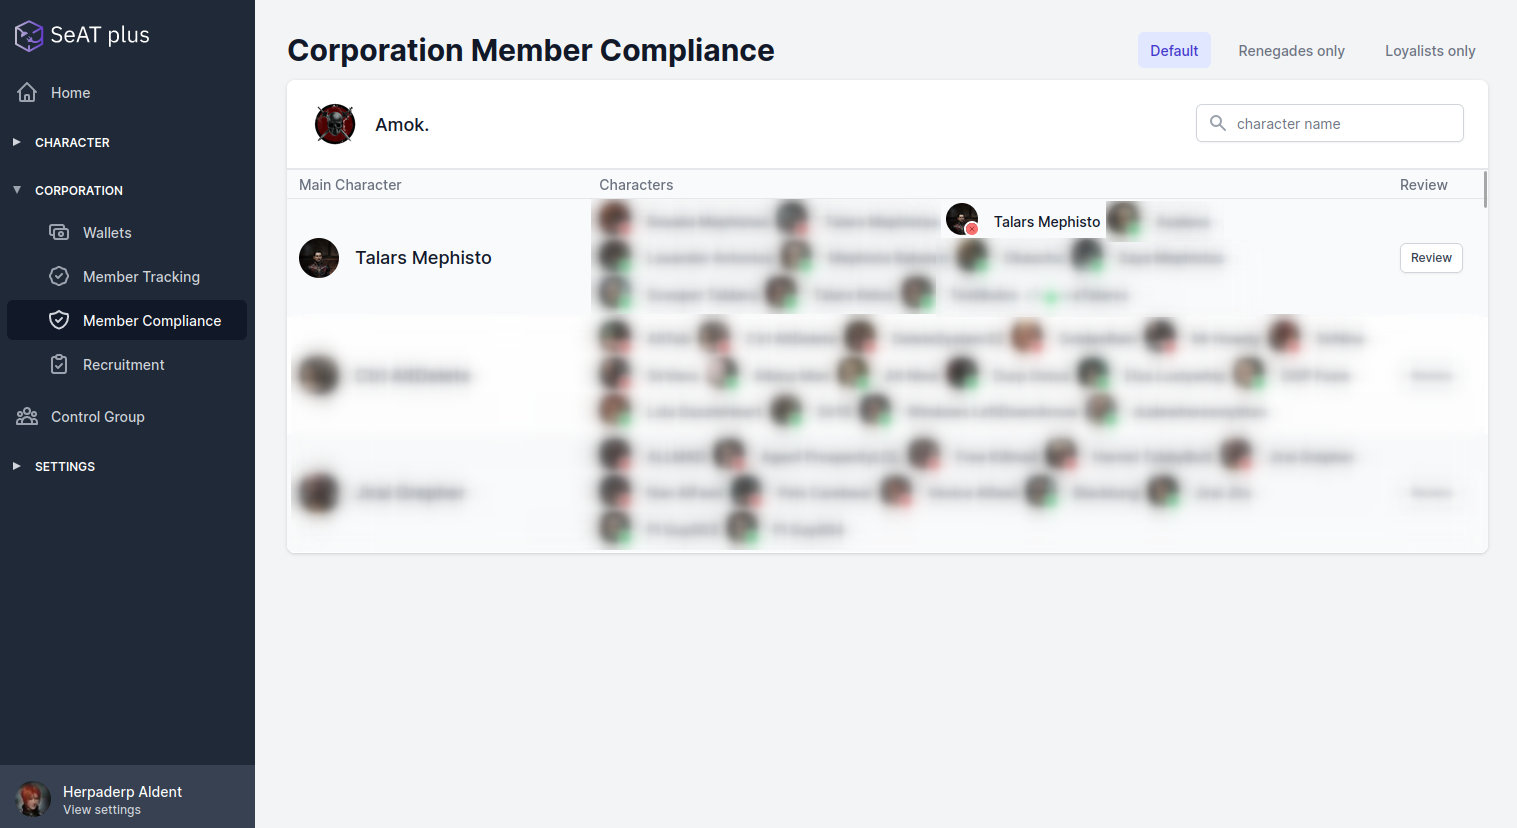 Corporation Member Compliance view